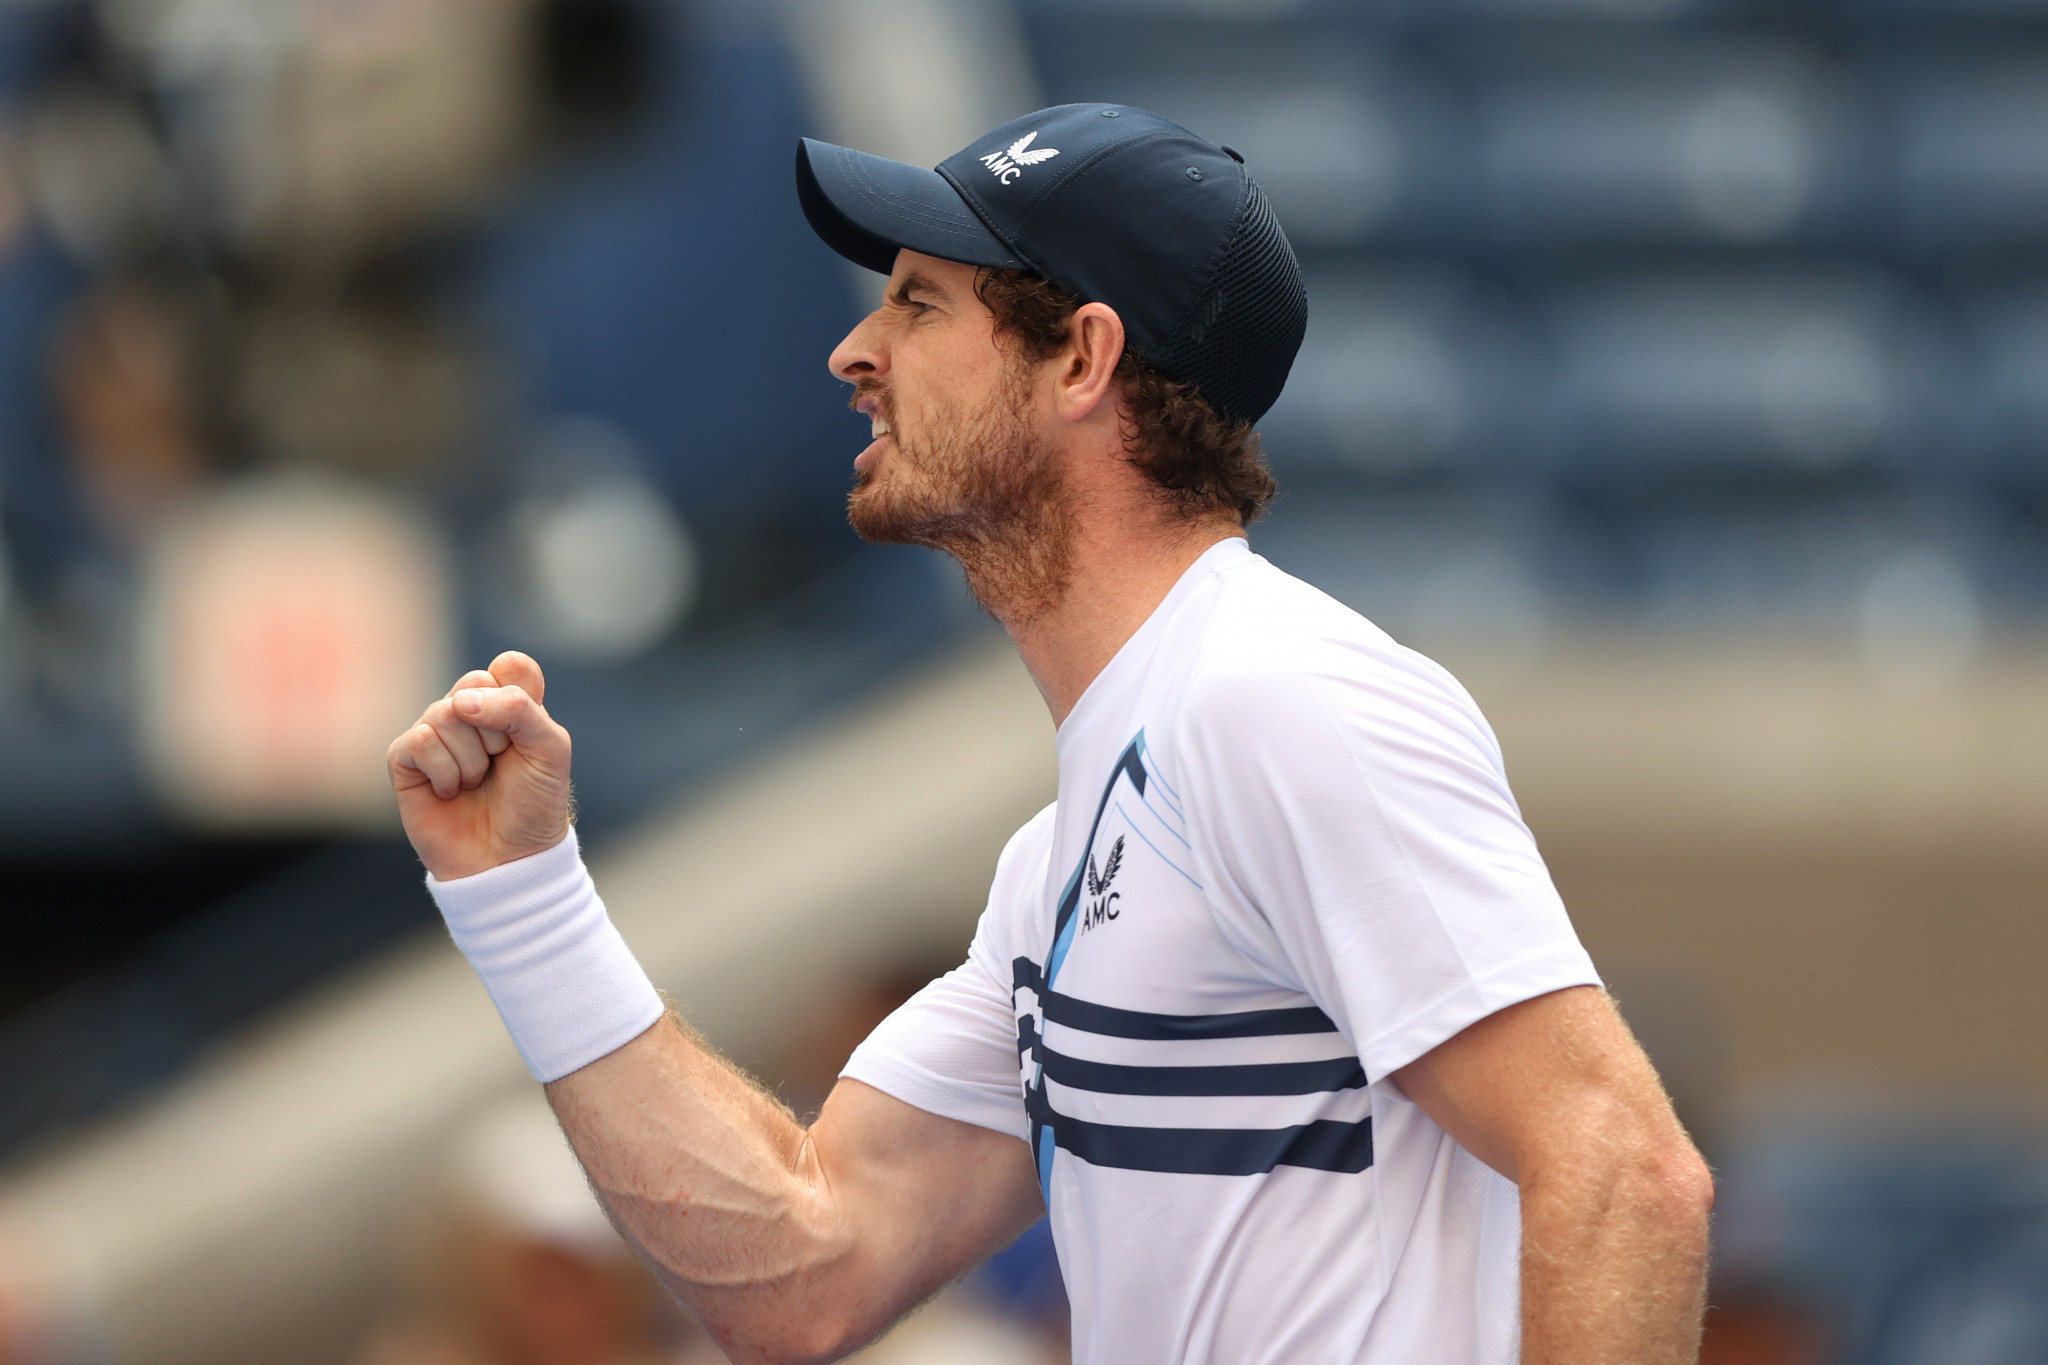 Britain's Andy Murray, a former US Open champion, was involved in an epic five set tussle with Stefanos Tsitsipas, which the Greek player edged in just under five hours ©Getty Images